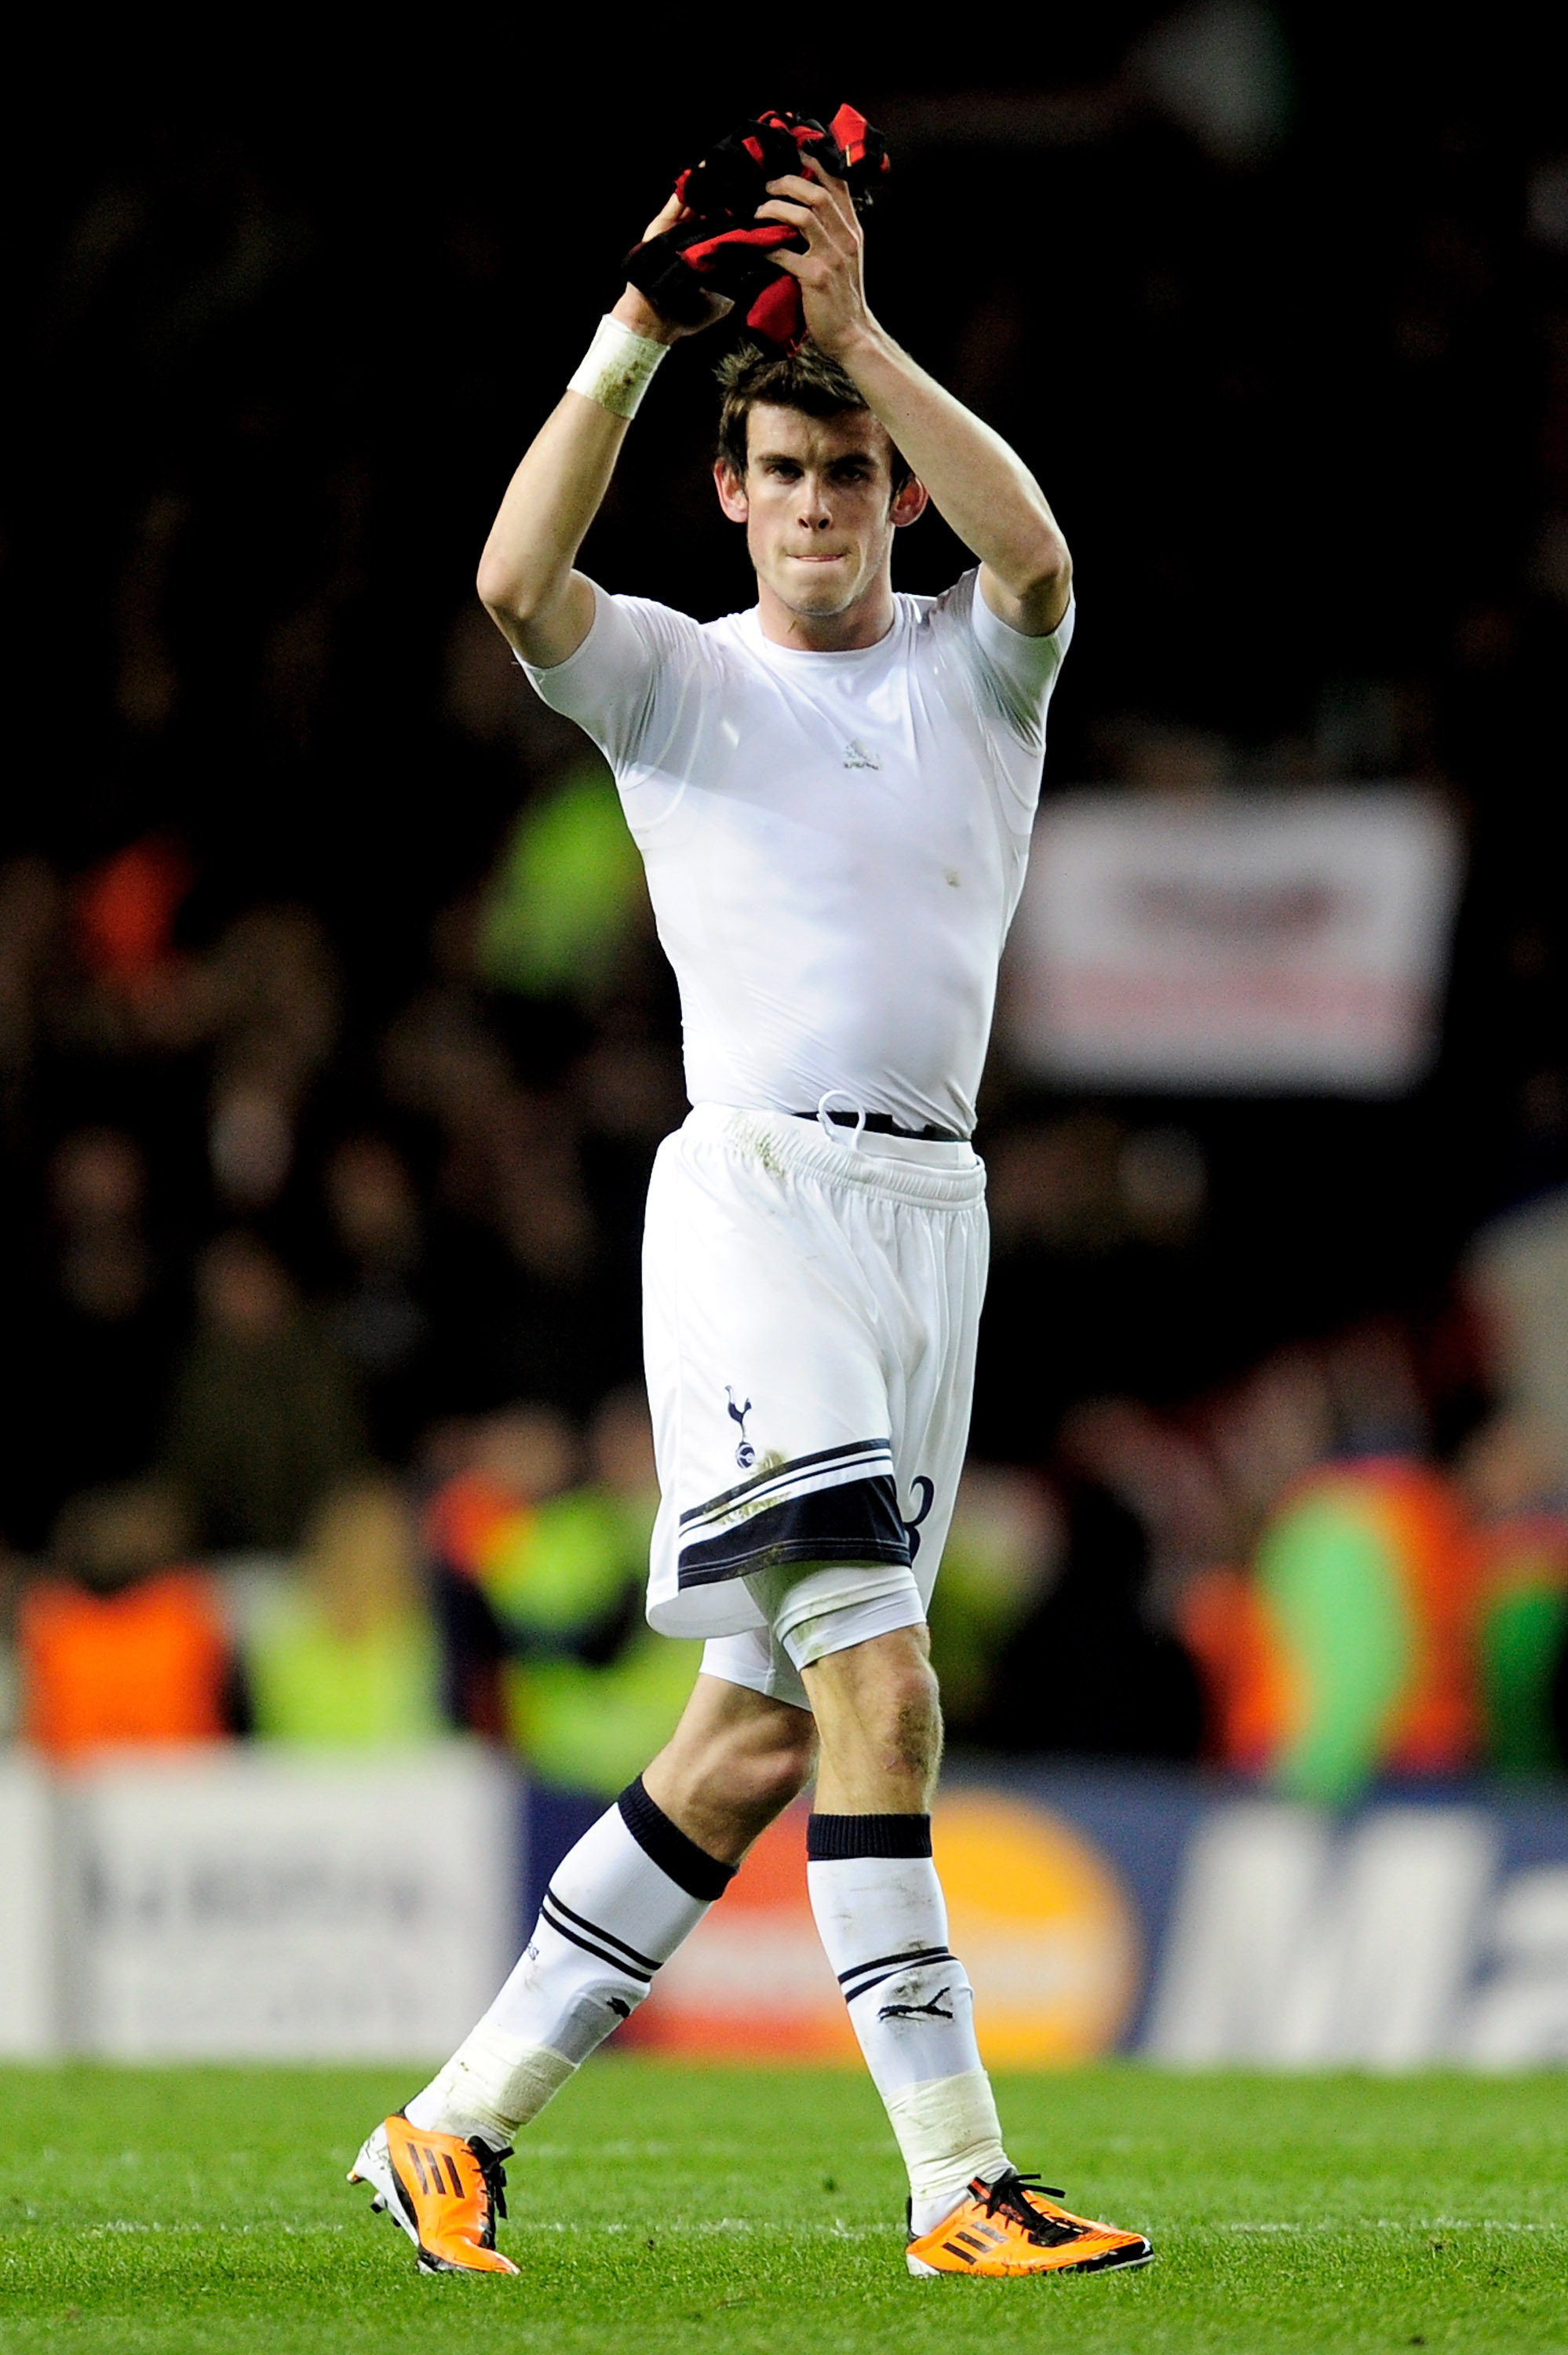 LONDON, ENGLAND - MARCH 09:  Gareth Bale of Tottenham celebrates at the end of the UEFA Champions League round of 16 second leg match between Tottenham Hotspur and AC Milan at White Hart Lane on March 9, 2011 in London, England.  (Photo by Jamie McDonald/